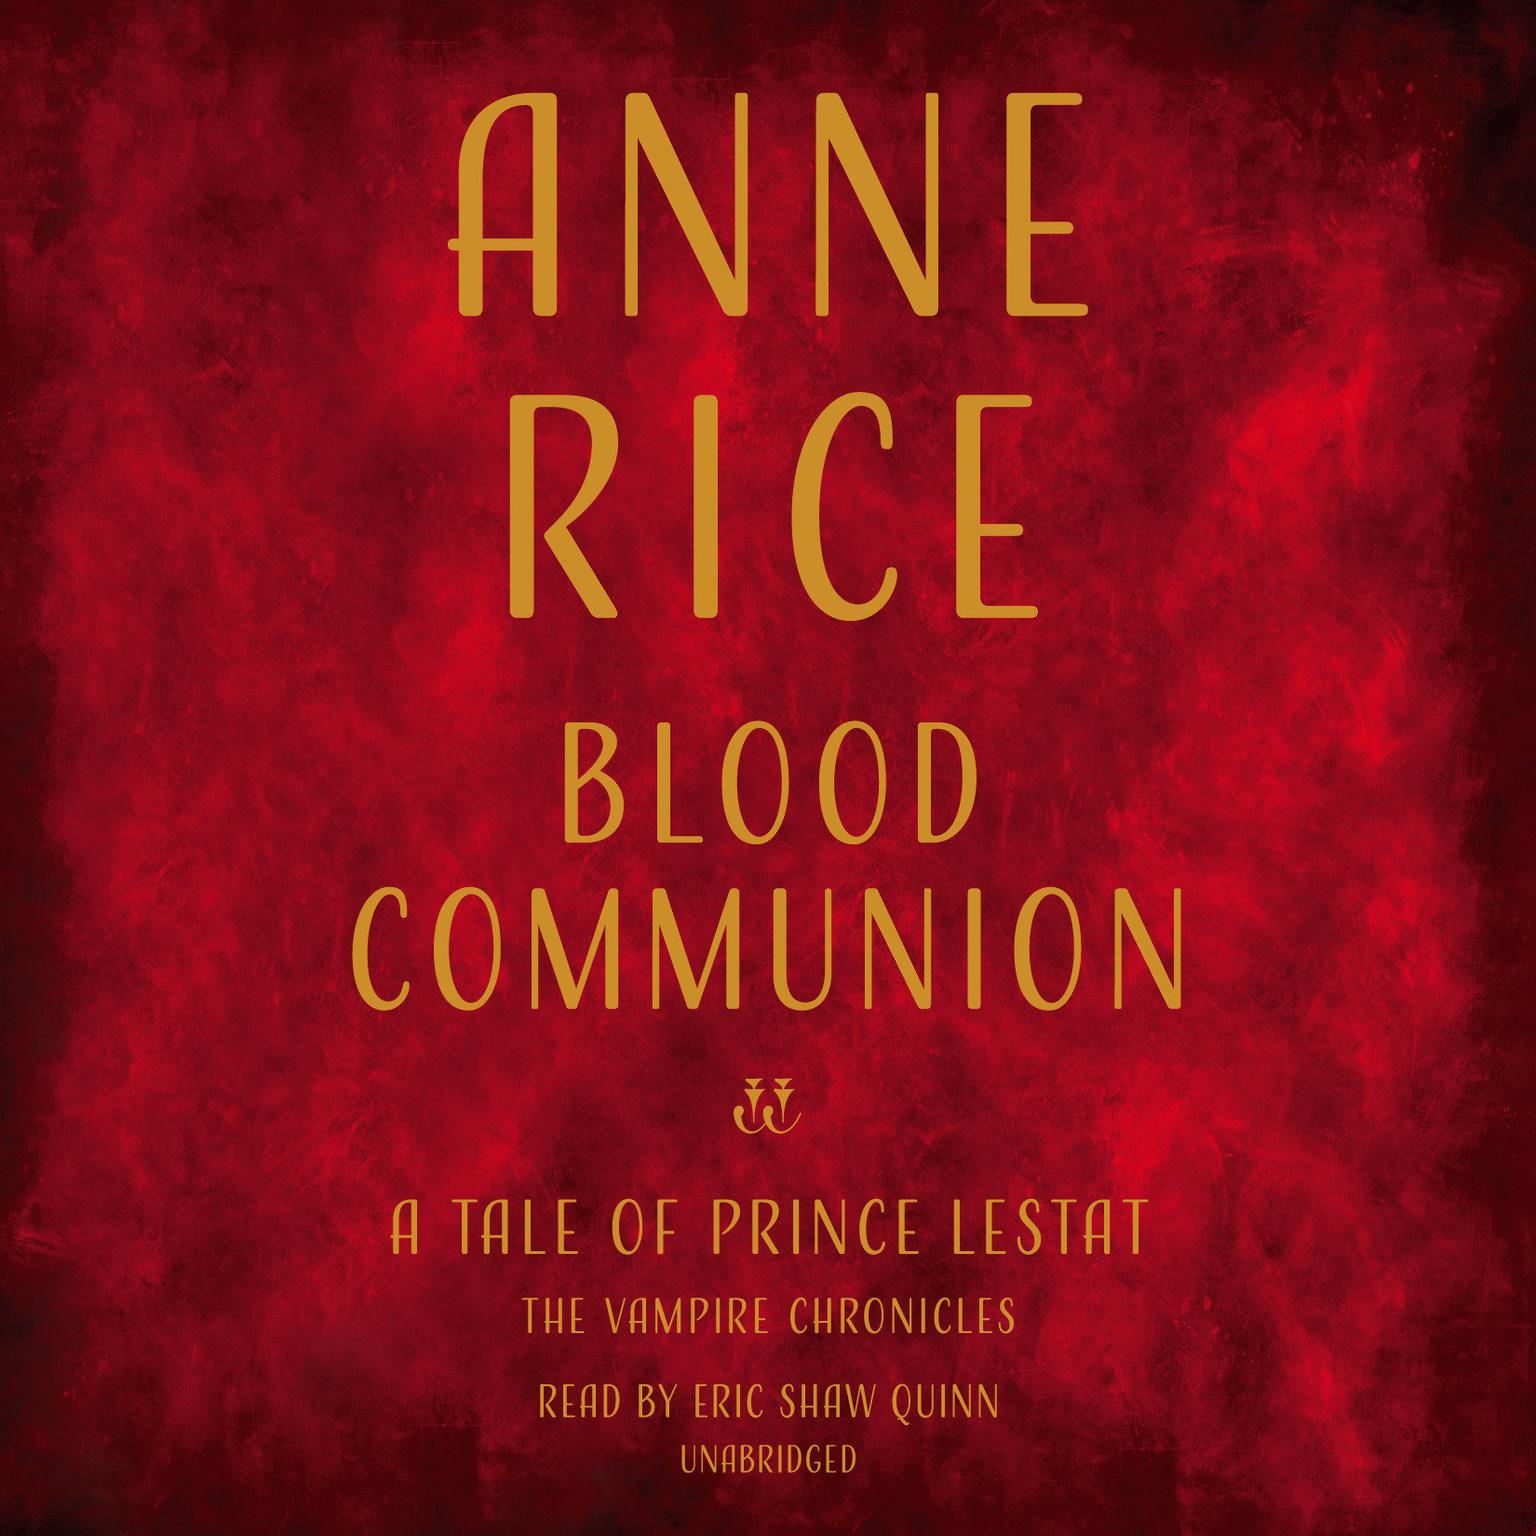 Blood Communion: A Tale of Prince Lestat Audiobook, by Anne Rice